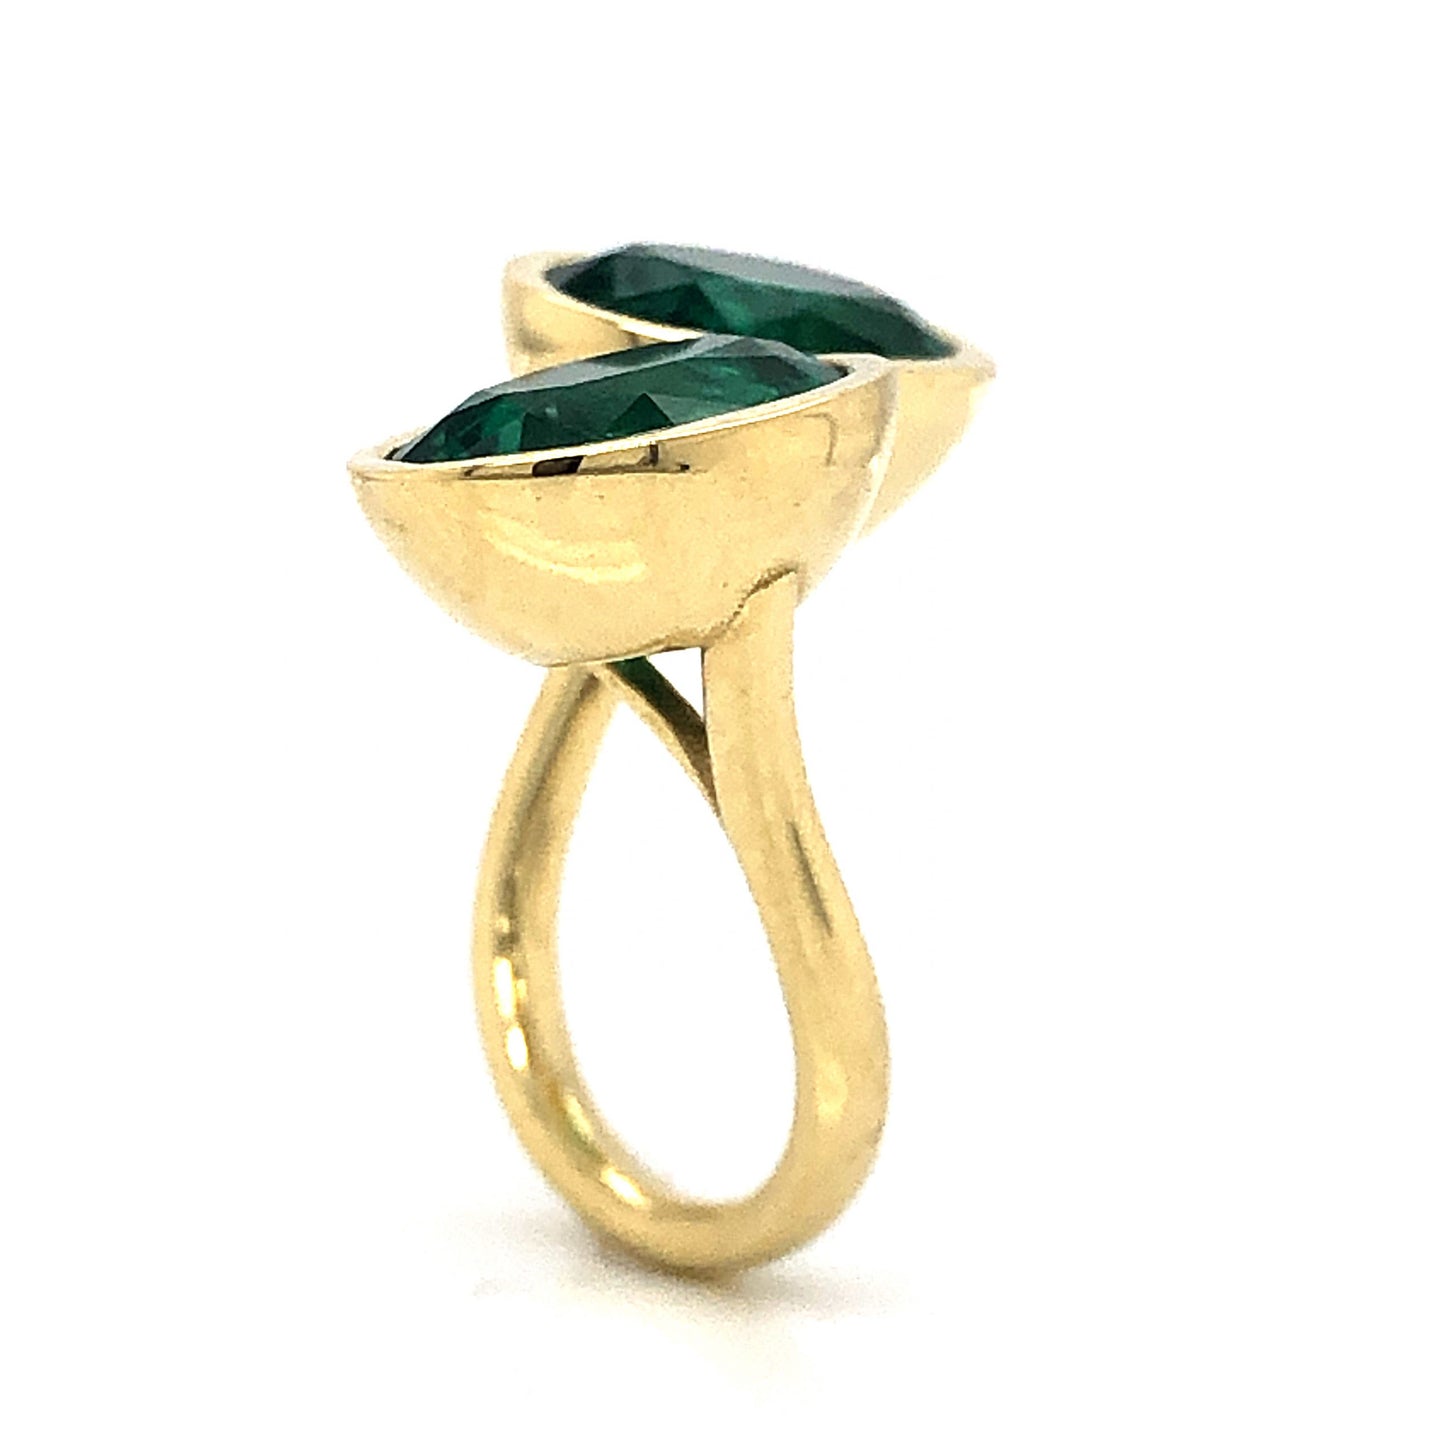 Double Oval Cut Emerald Cocktail Ring in 18k Yellow Gold